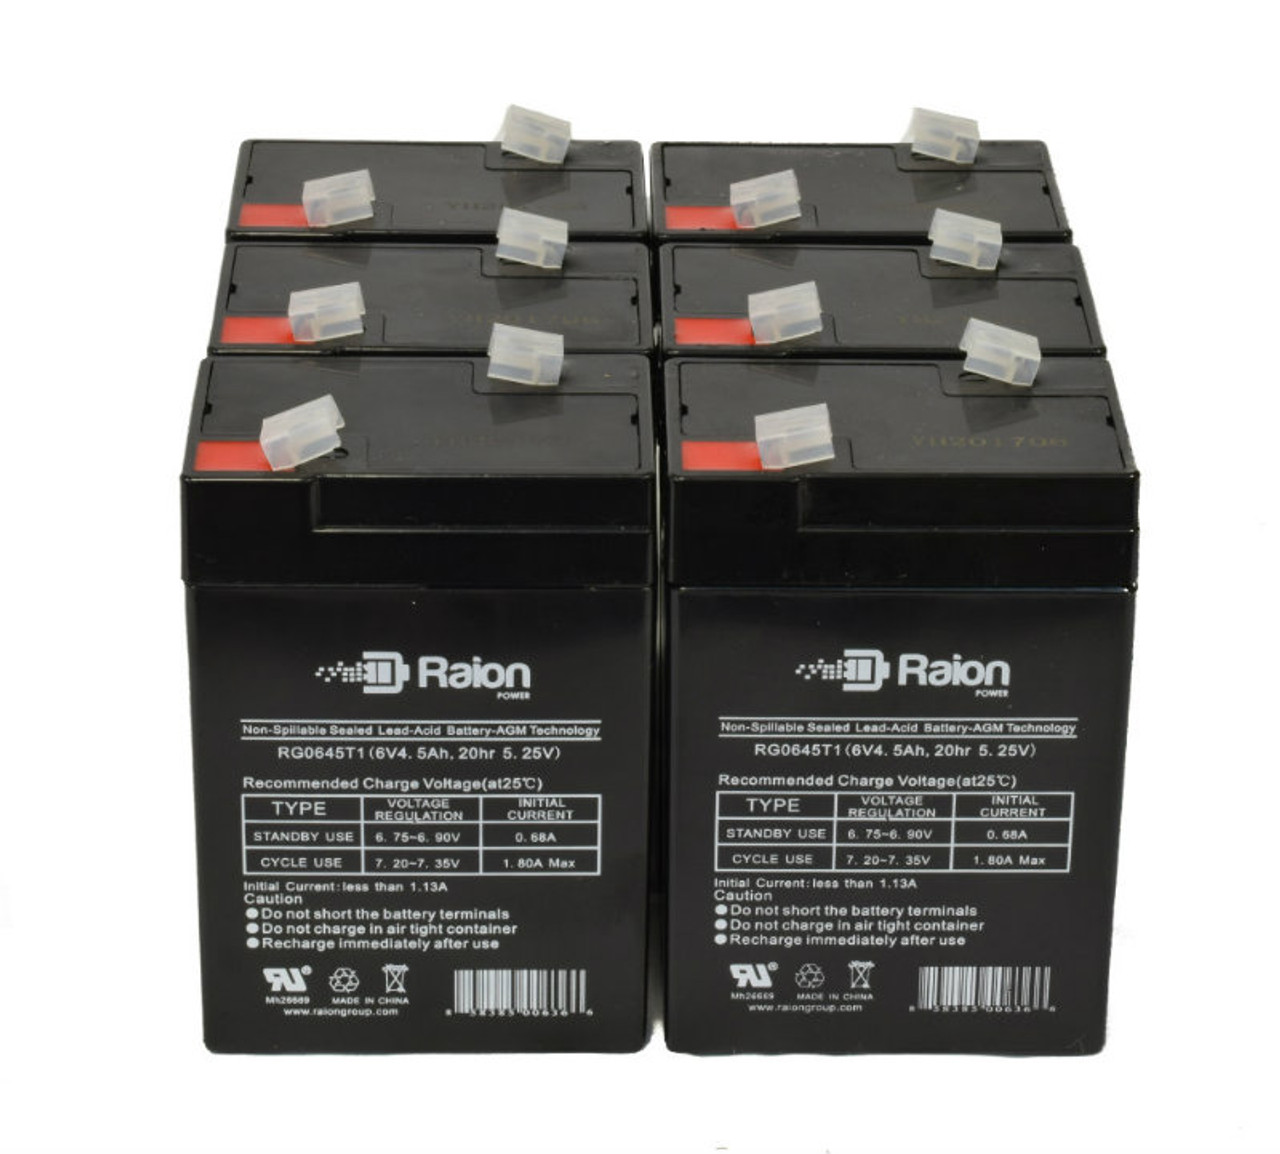 Raion Power 6V 4.5Ah Replacement Emergency Light Battery for Big Beam 2IL6S50 - 6 Pack